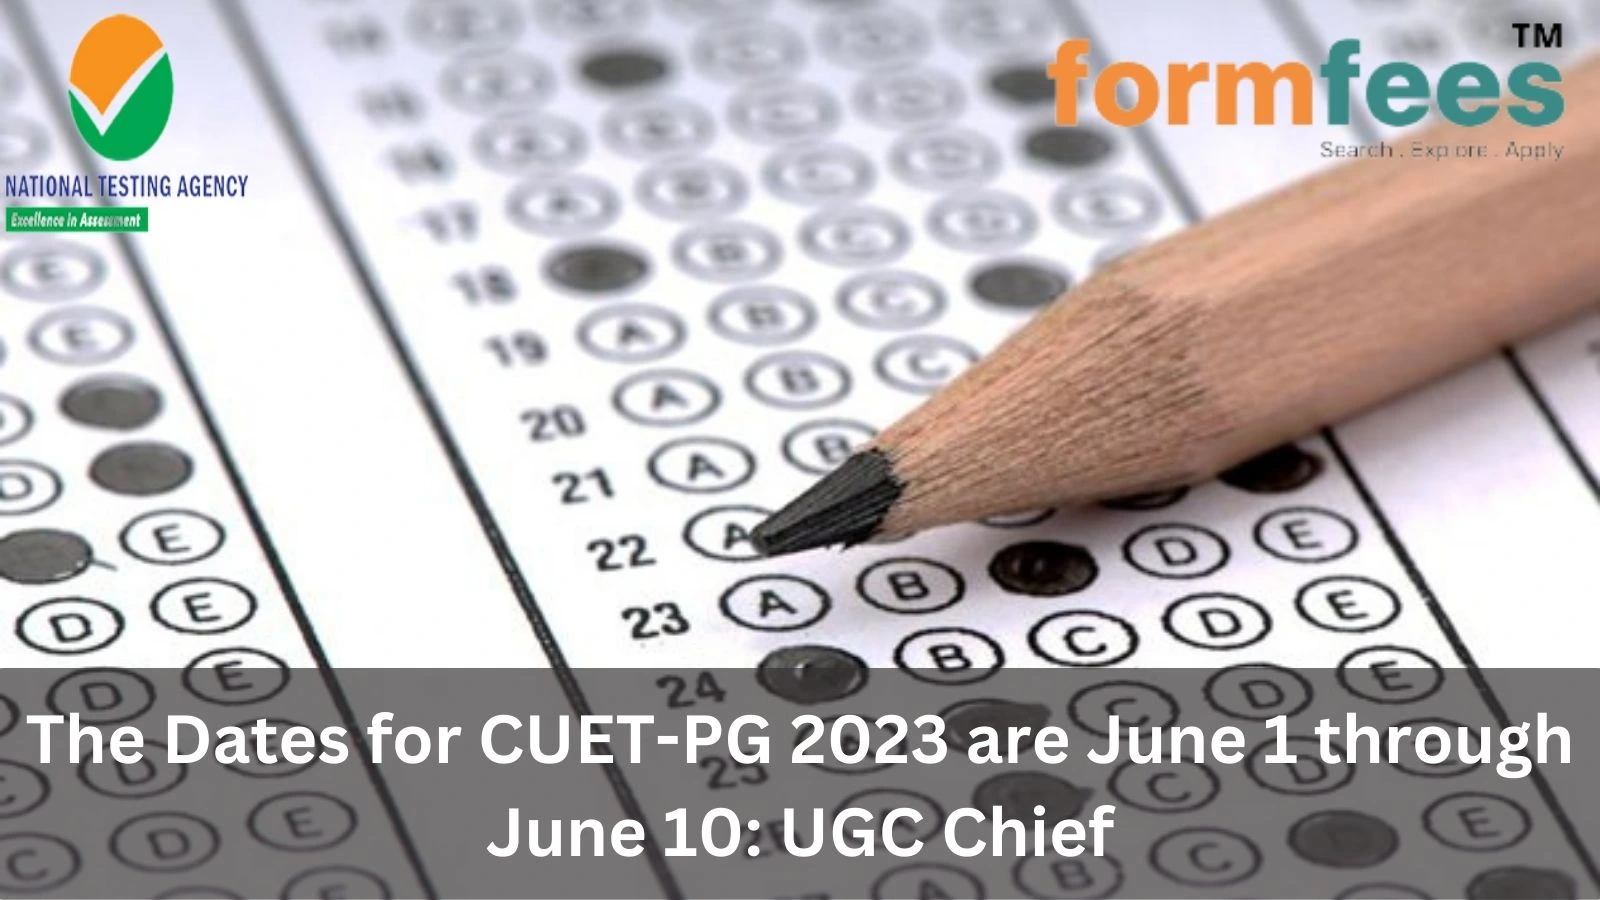 The Dates for CUET-PG 2023 are June 1 through June 10: UGC Chief